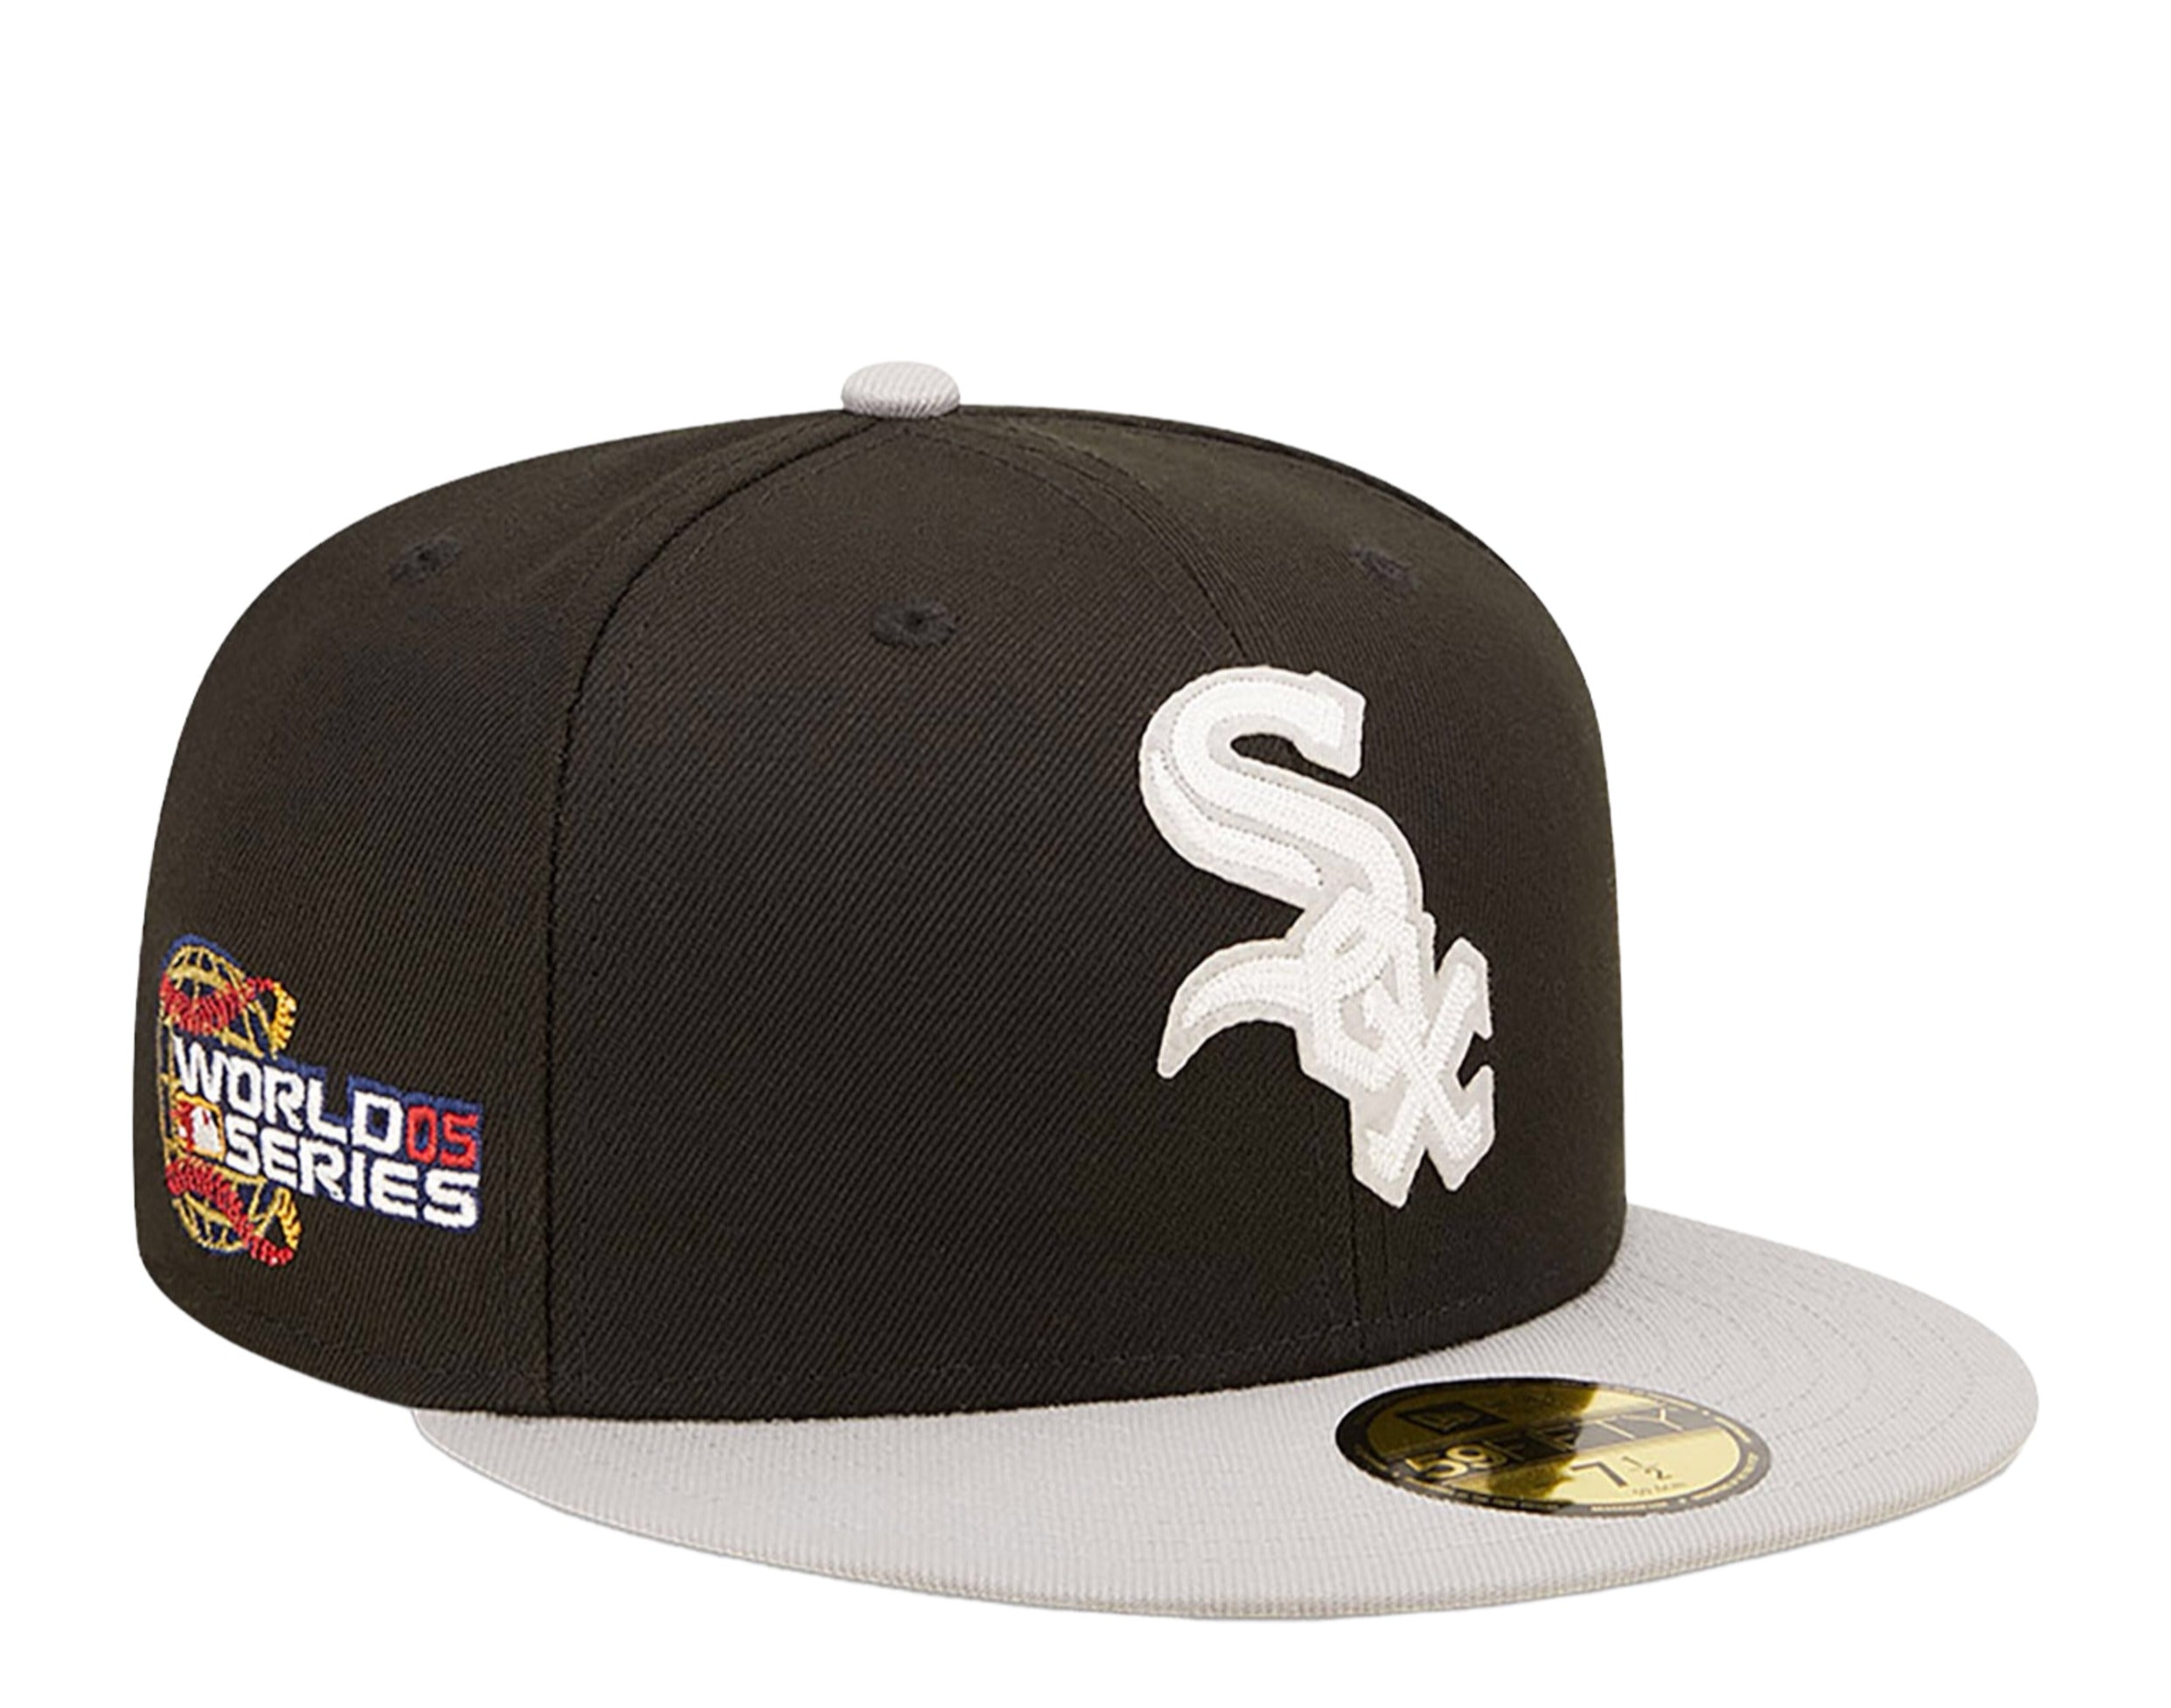 white sox world series patch